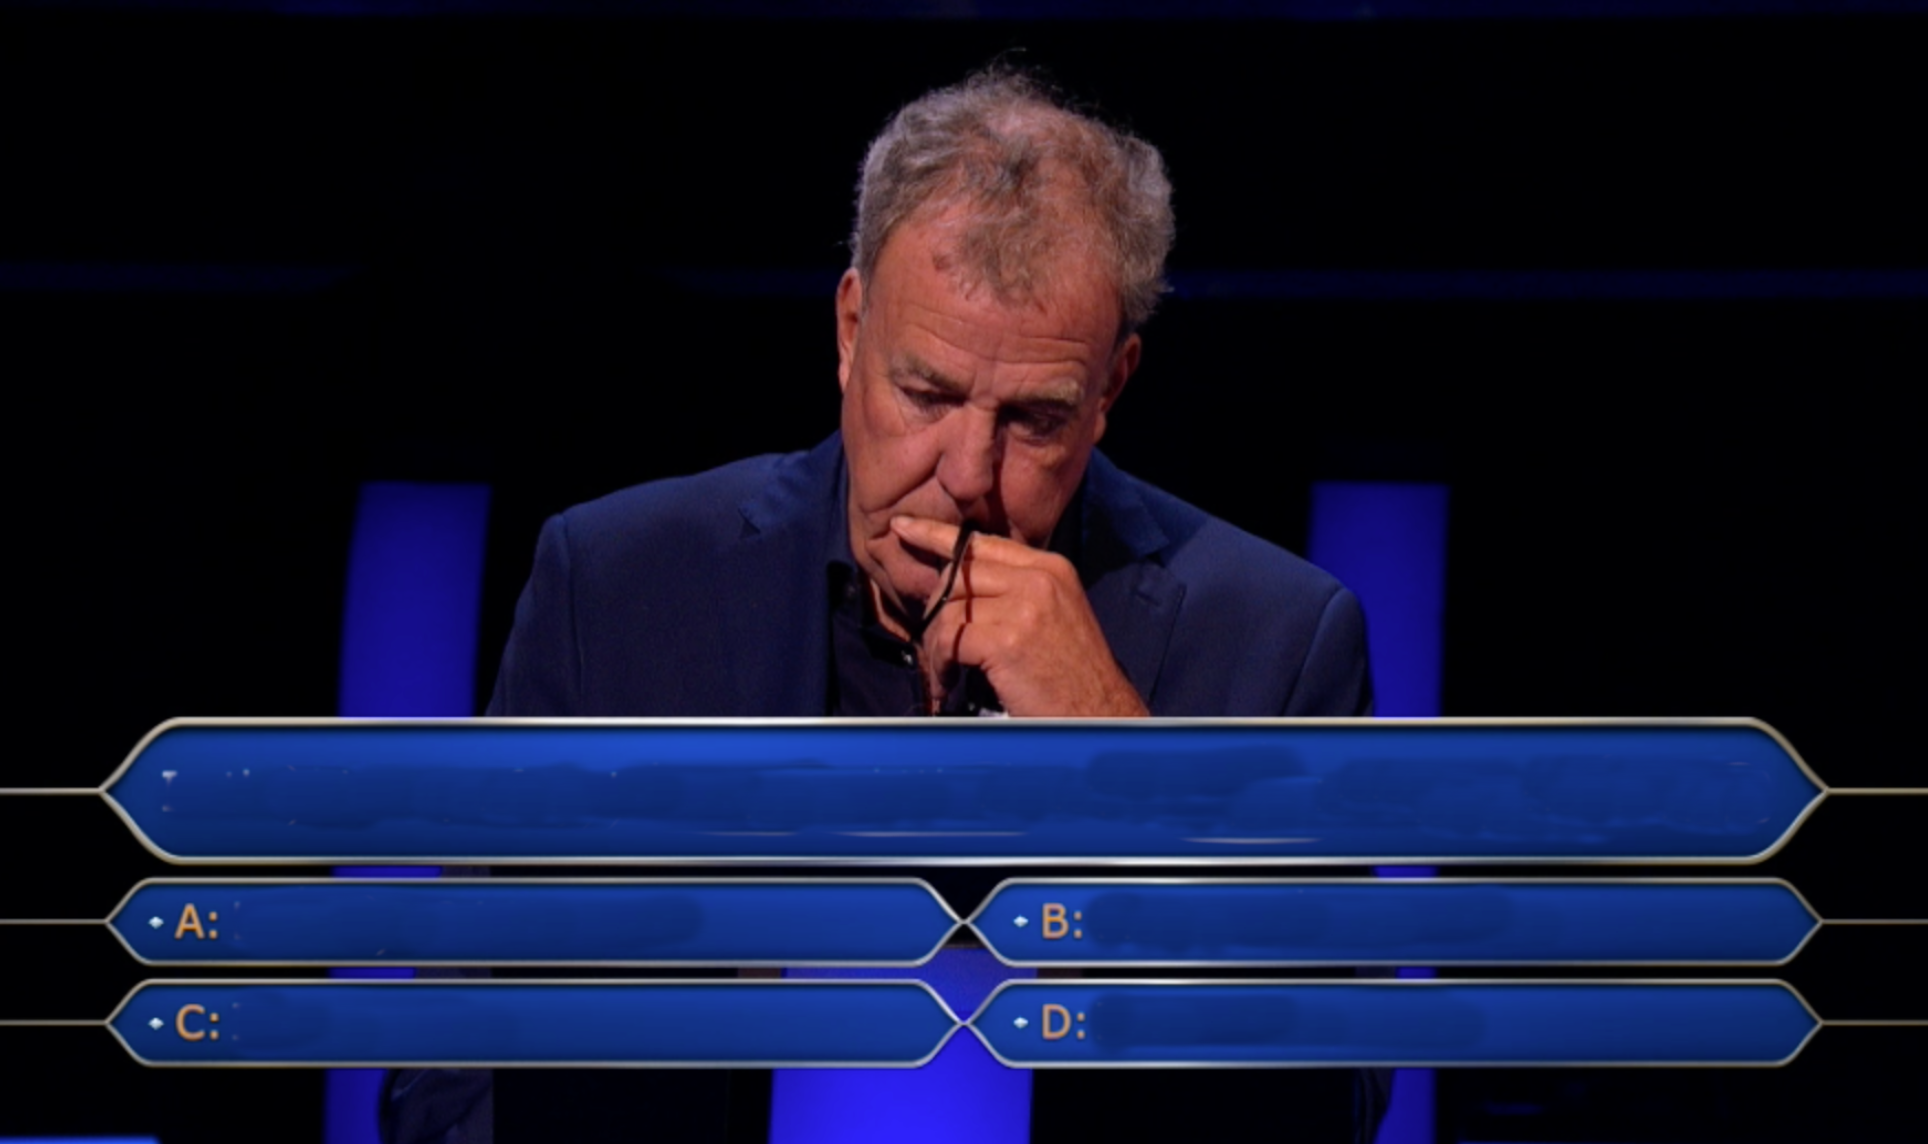 jeremy-clarkson-who-wants-to-be-a-millionaire-blank-template-imgflip